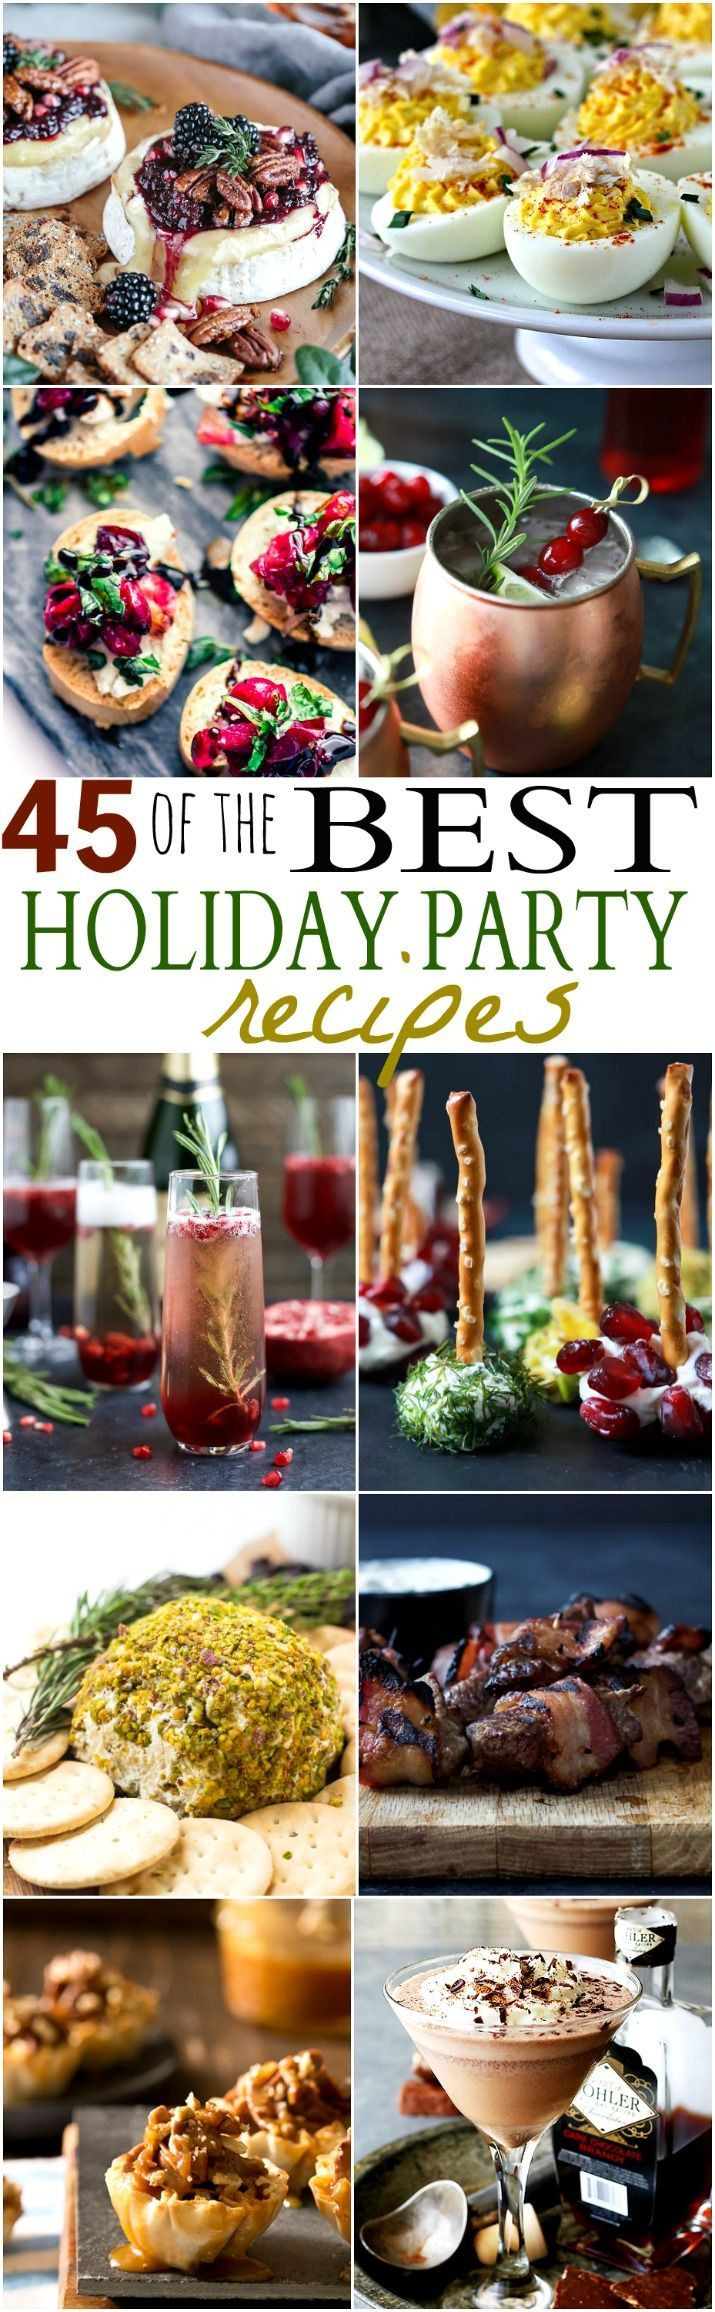 Stop And Shop Holiday Dinners
 45 of the BEST Holiday Party Recipes delicious